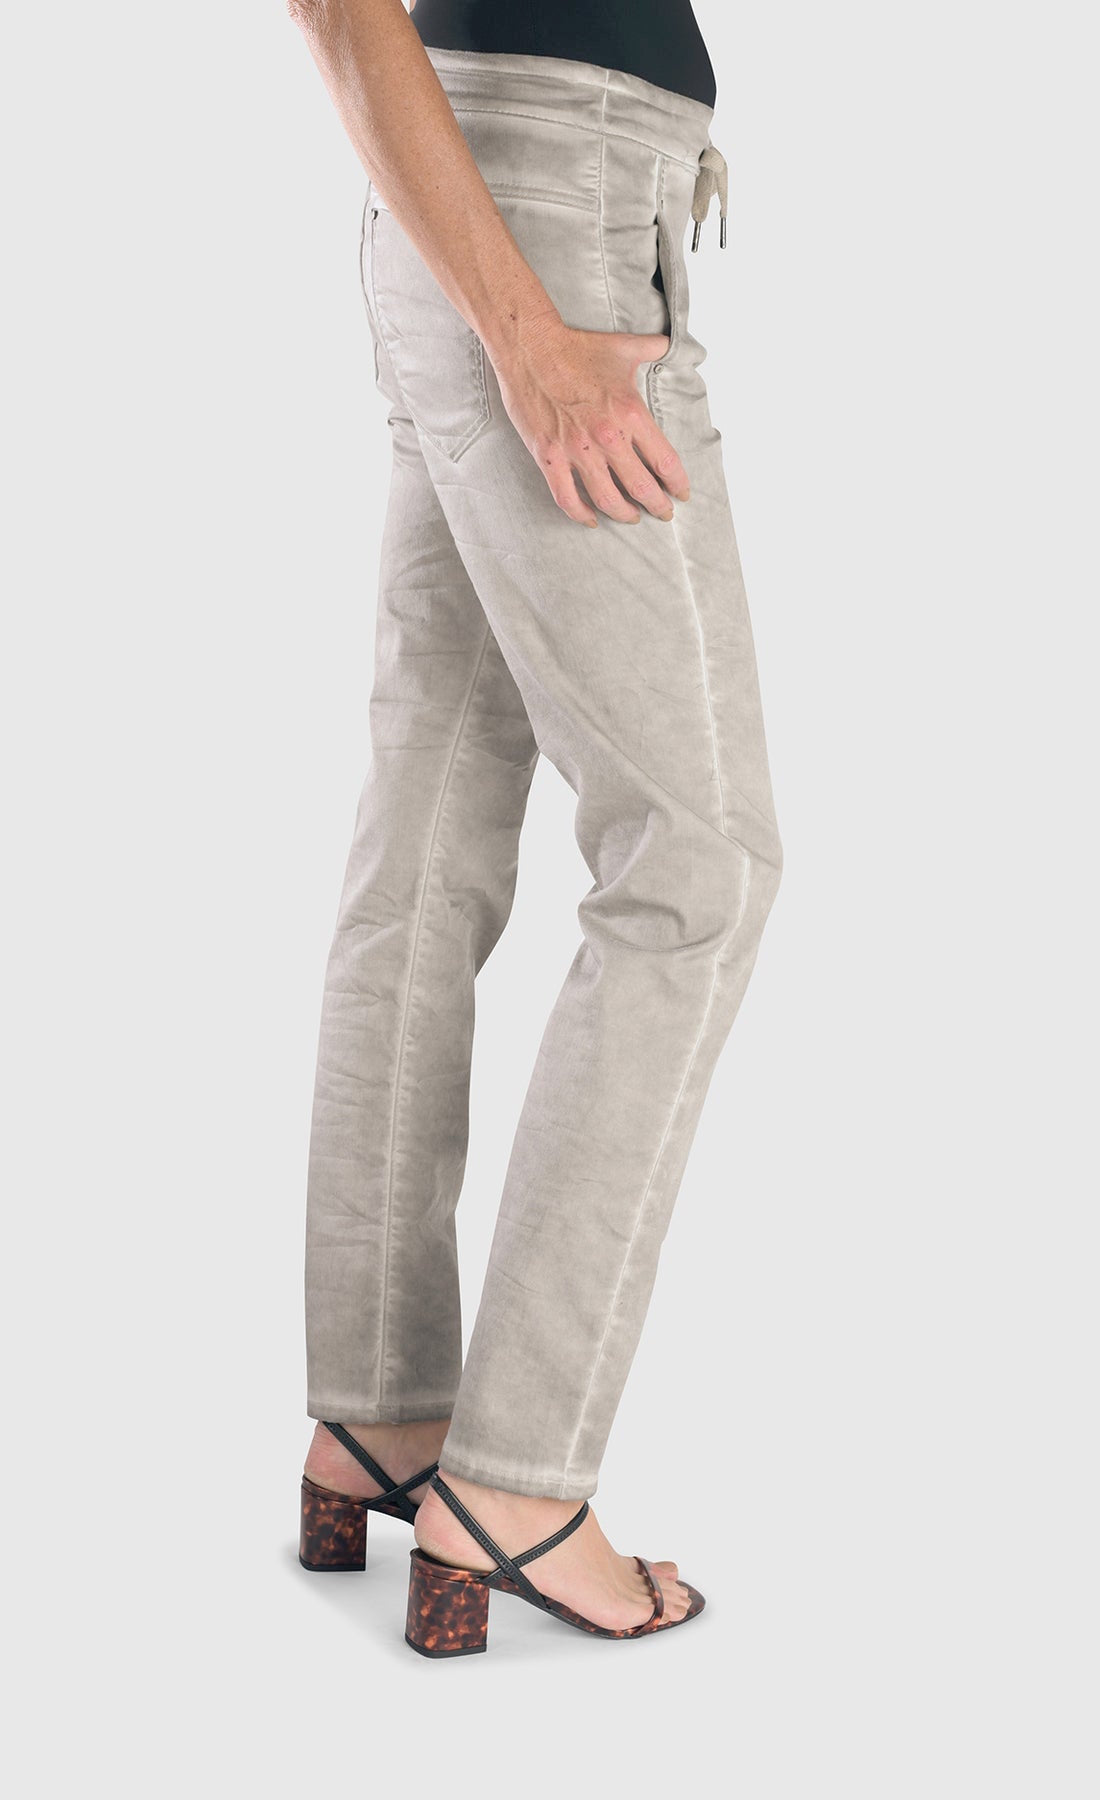 Right side bottom half view of a woman wearing the alembika grey iconic stretch jeans. These light grey jeans have a drawstring waistband with a tie, two front and back pockets and a relaxed slim/straight cut.